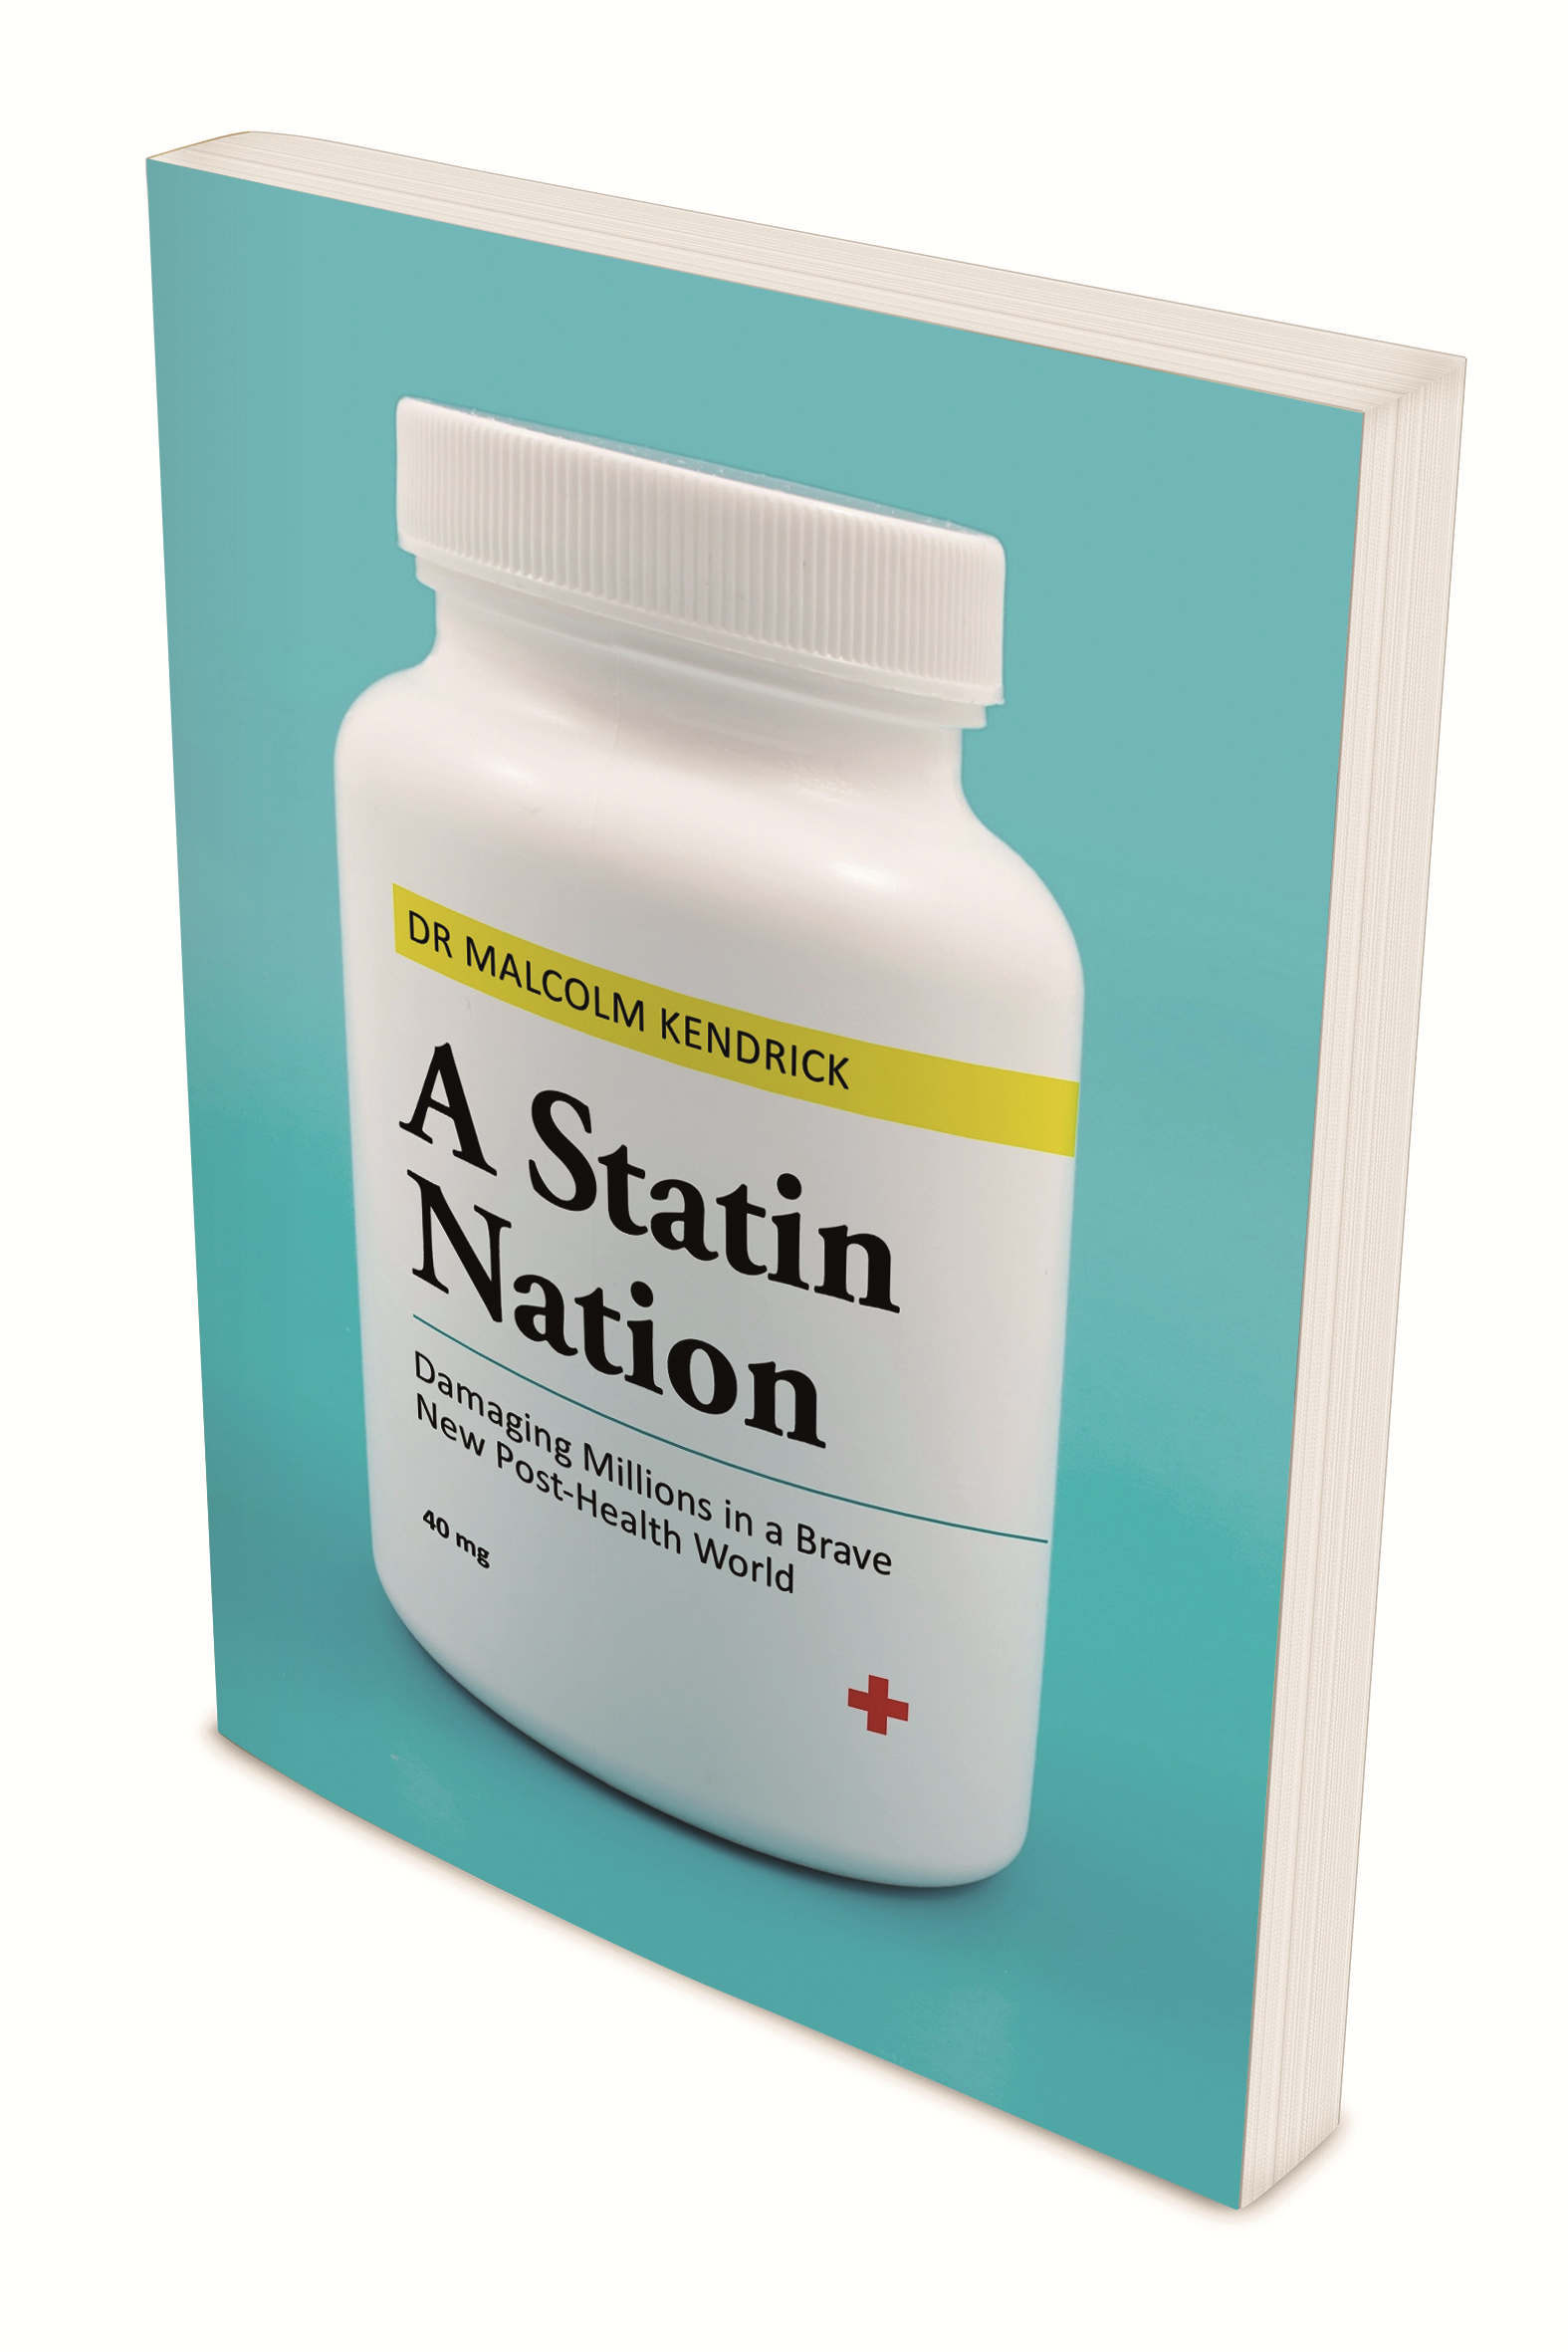 Book cover of 'A Statin Nation' by Malcolm Kendrick